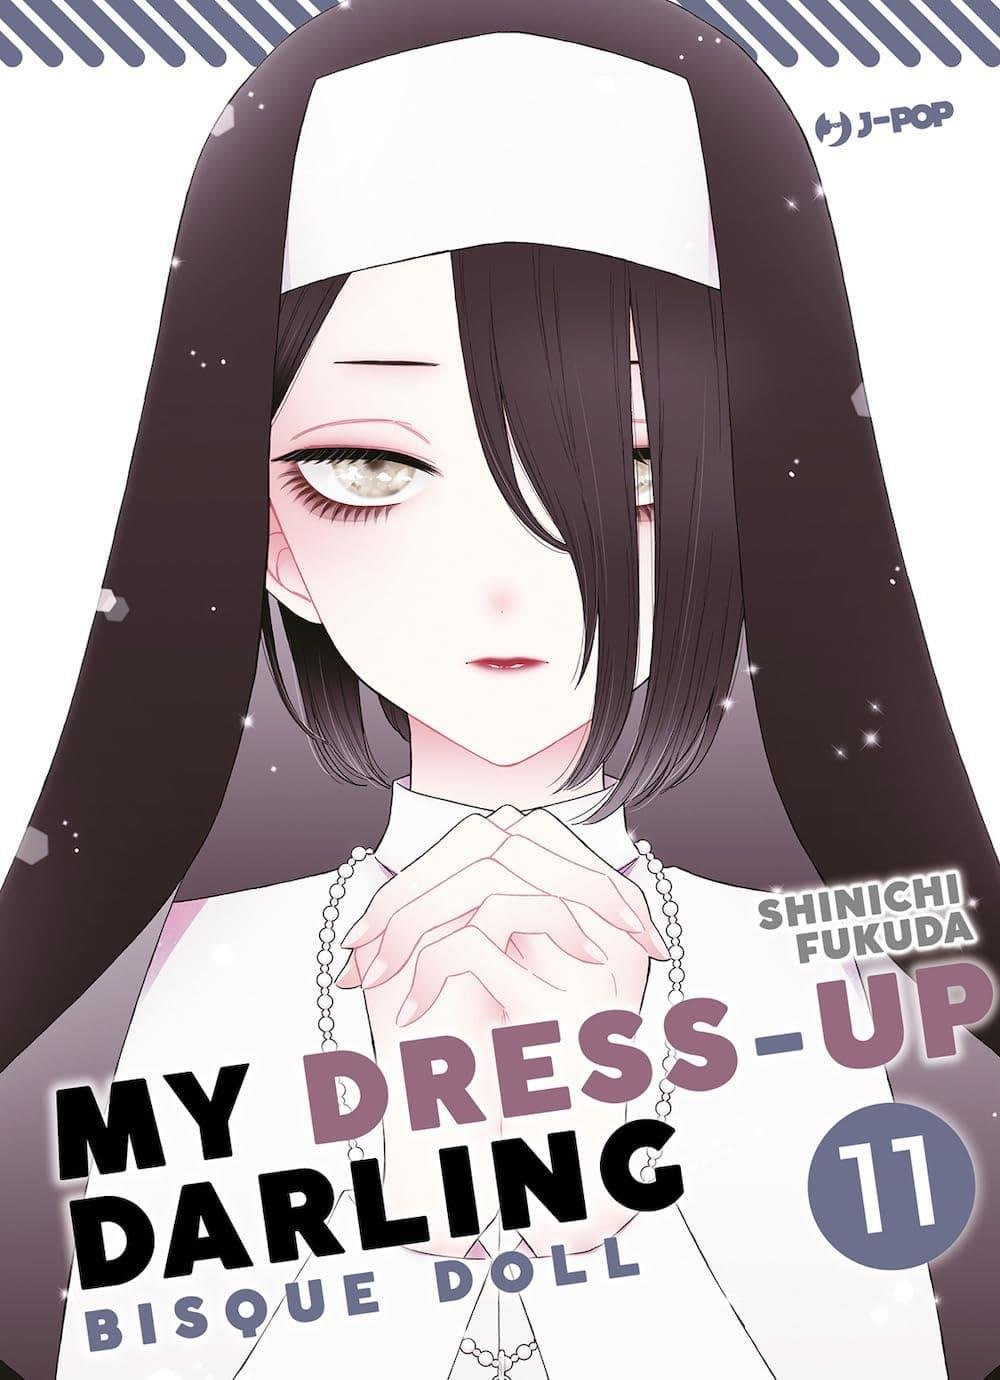 MY DRESS-UP DARLING - BISQUE DOLL 11